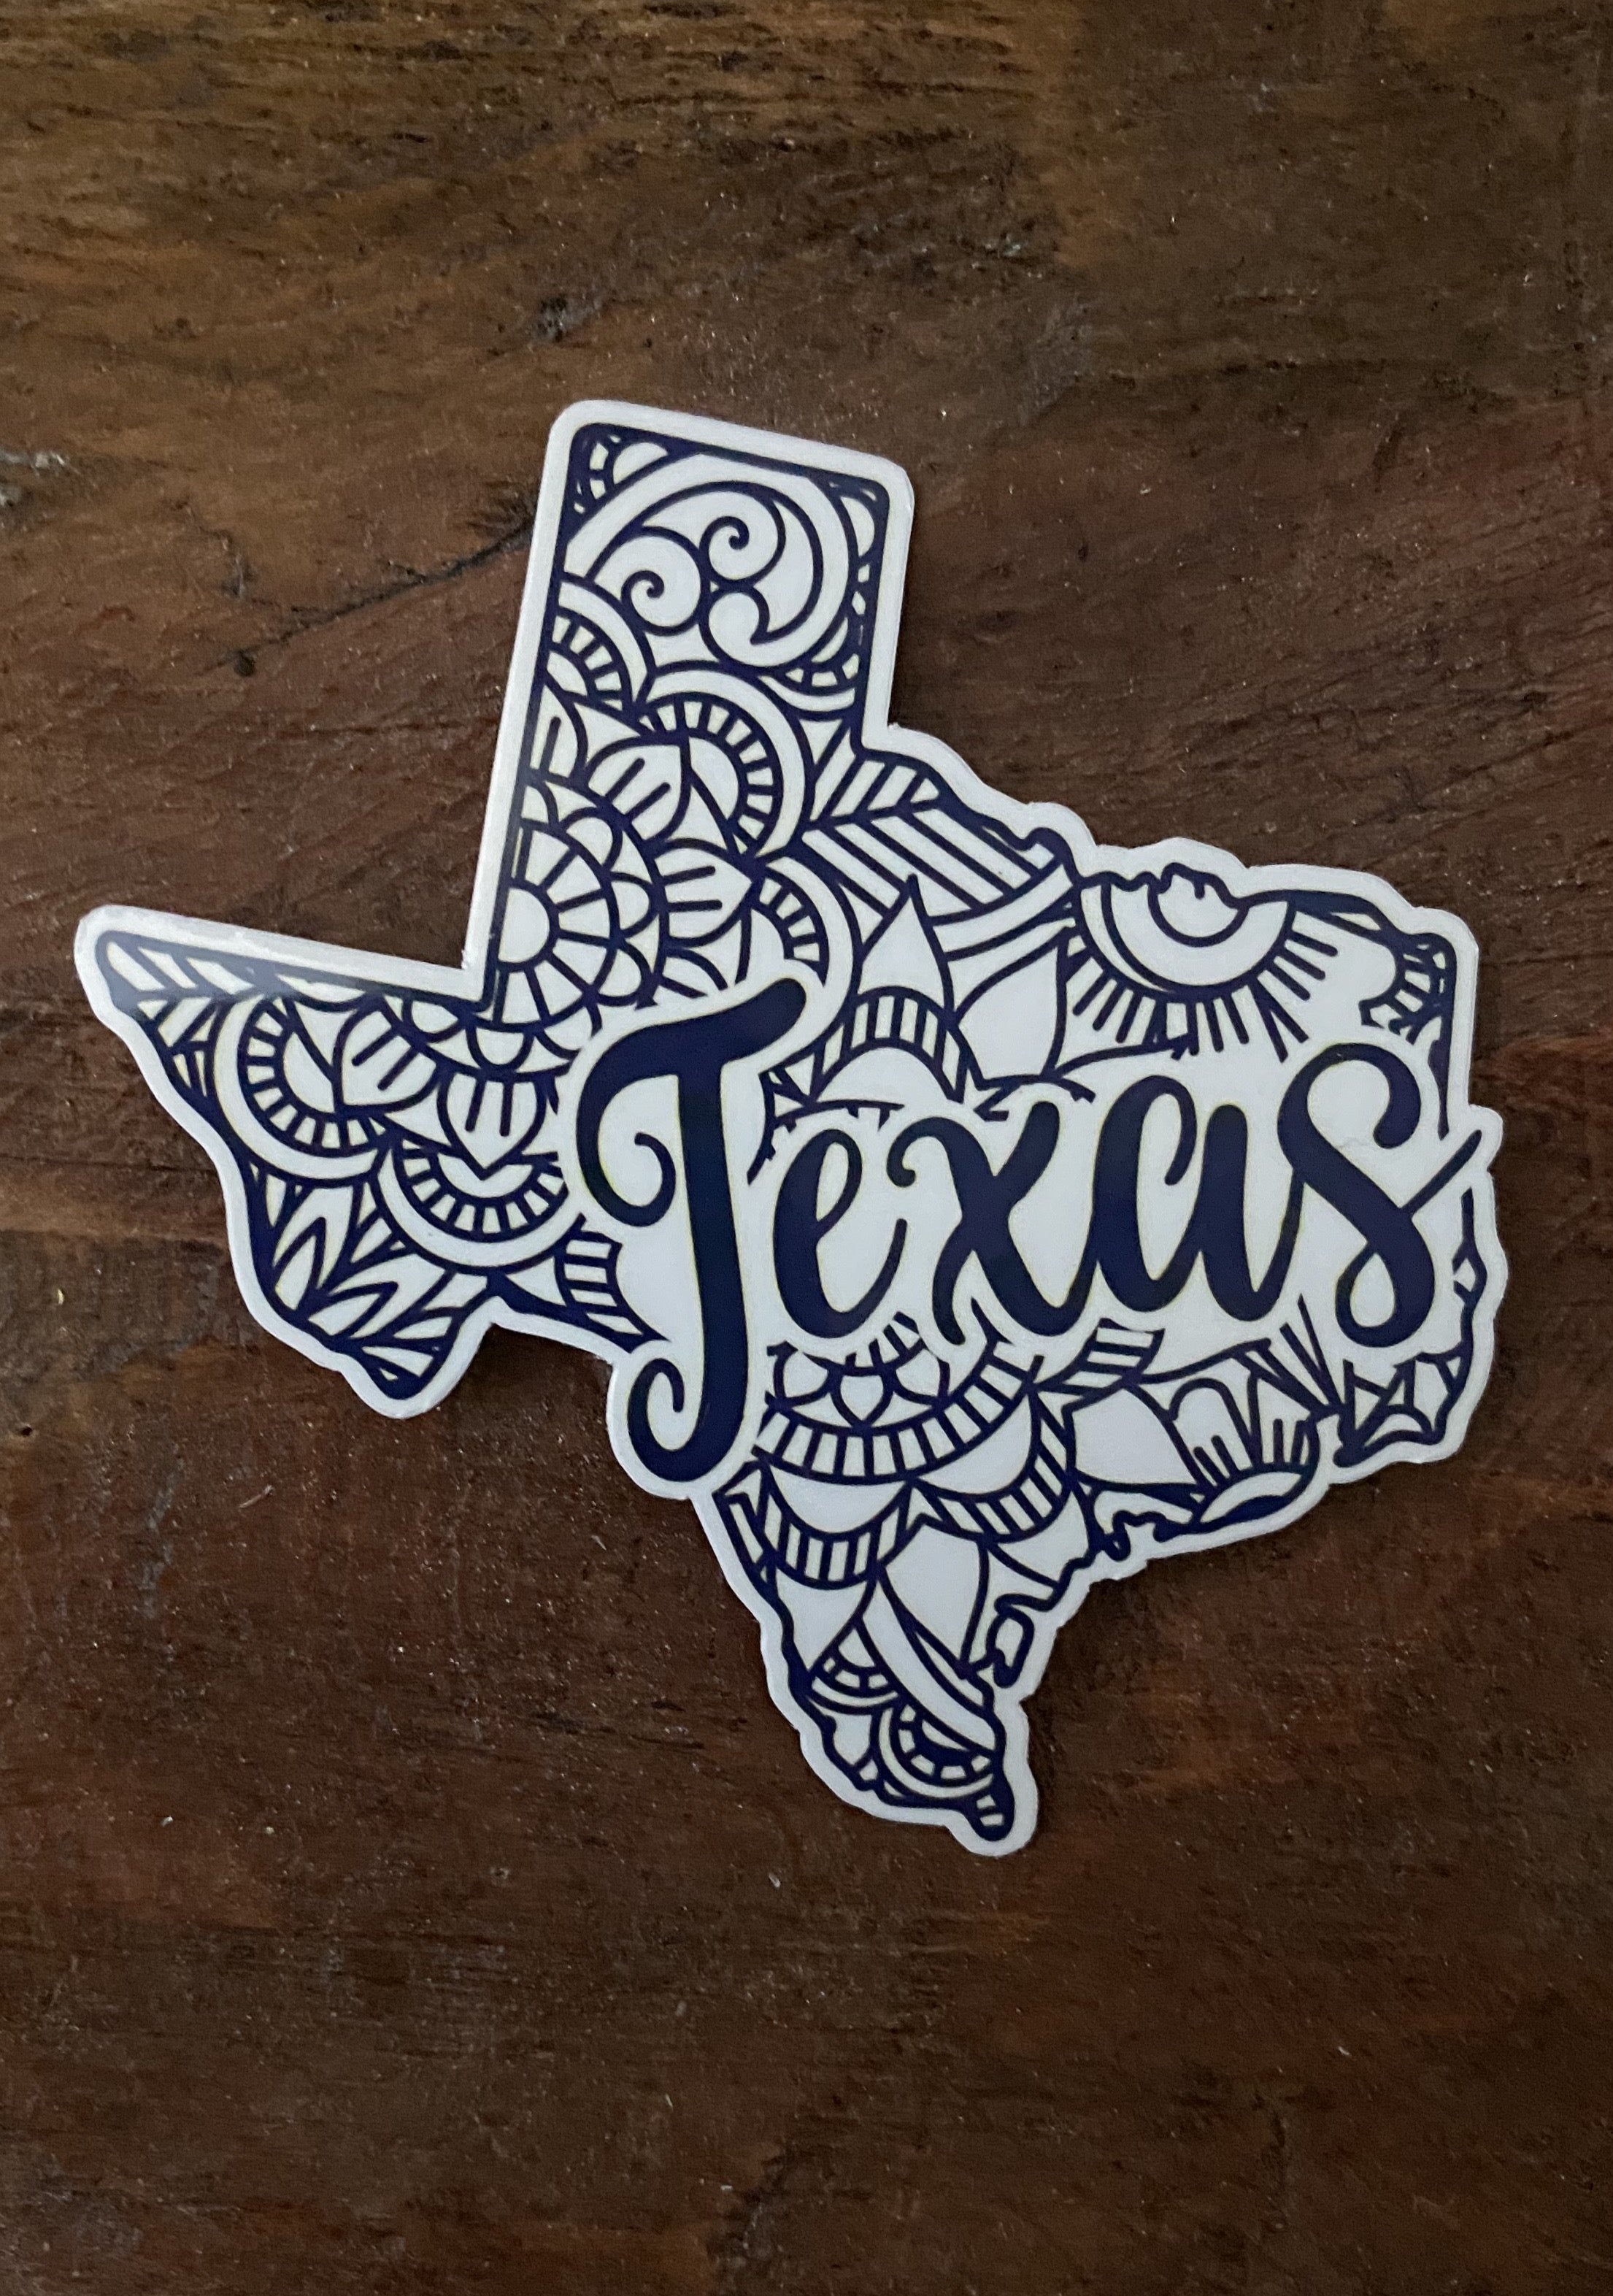 MULTIPLE STYLES: Texas Stickers